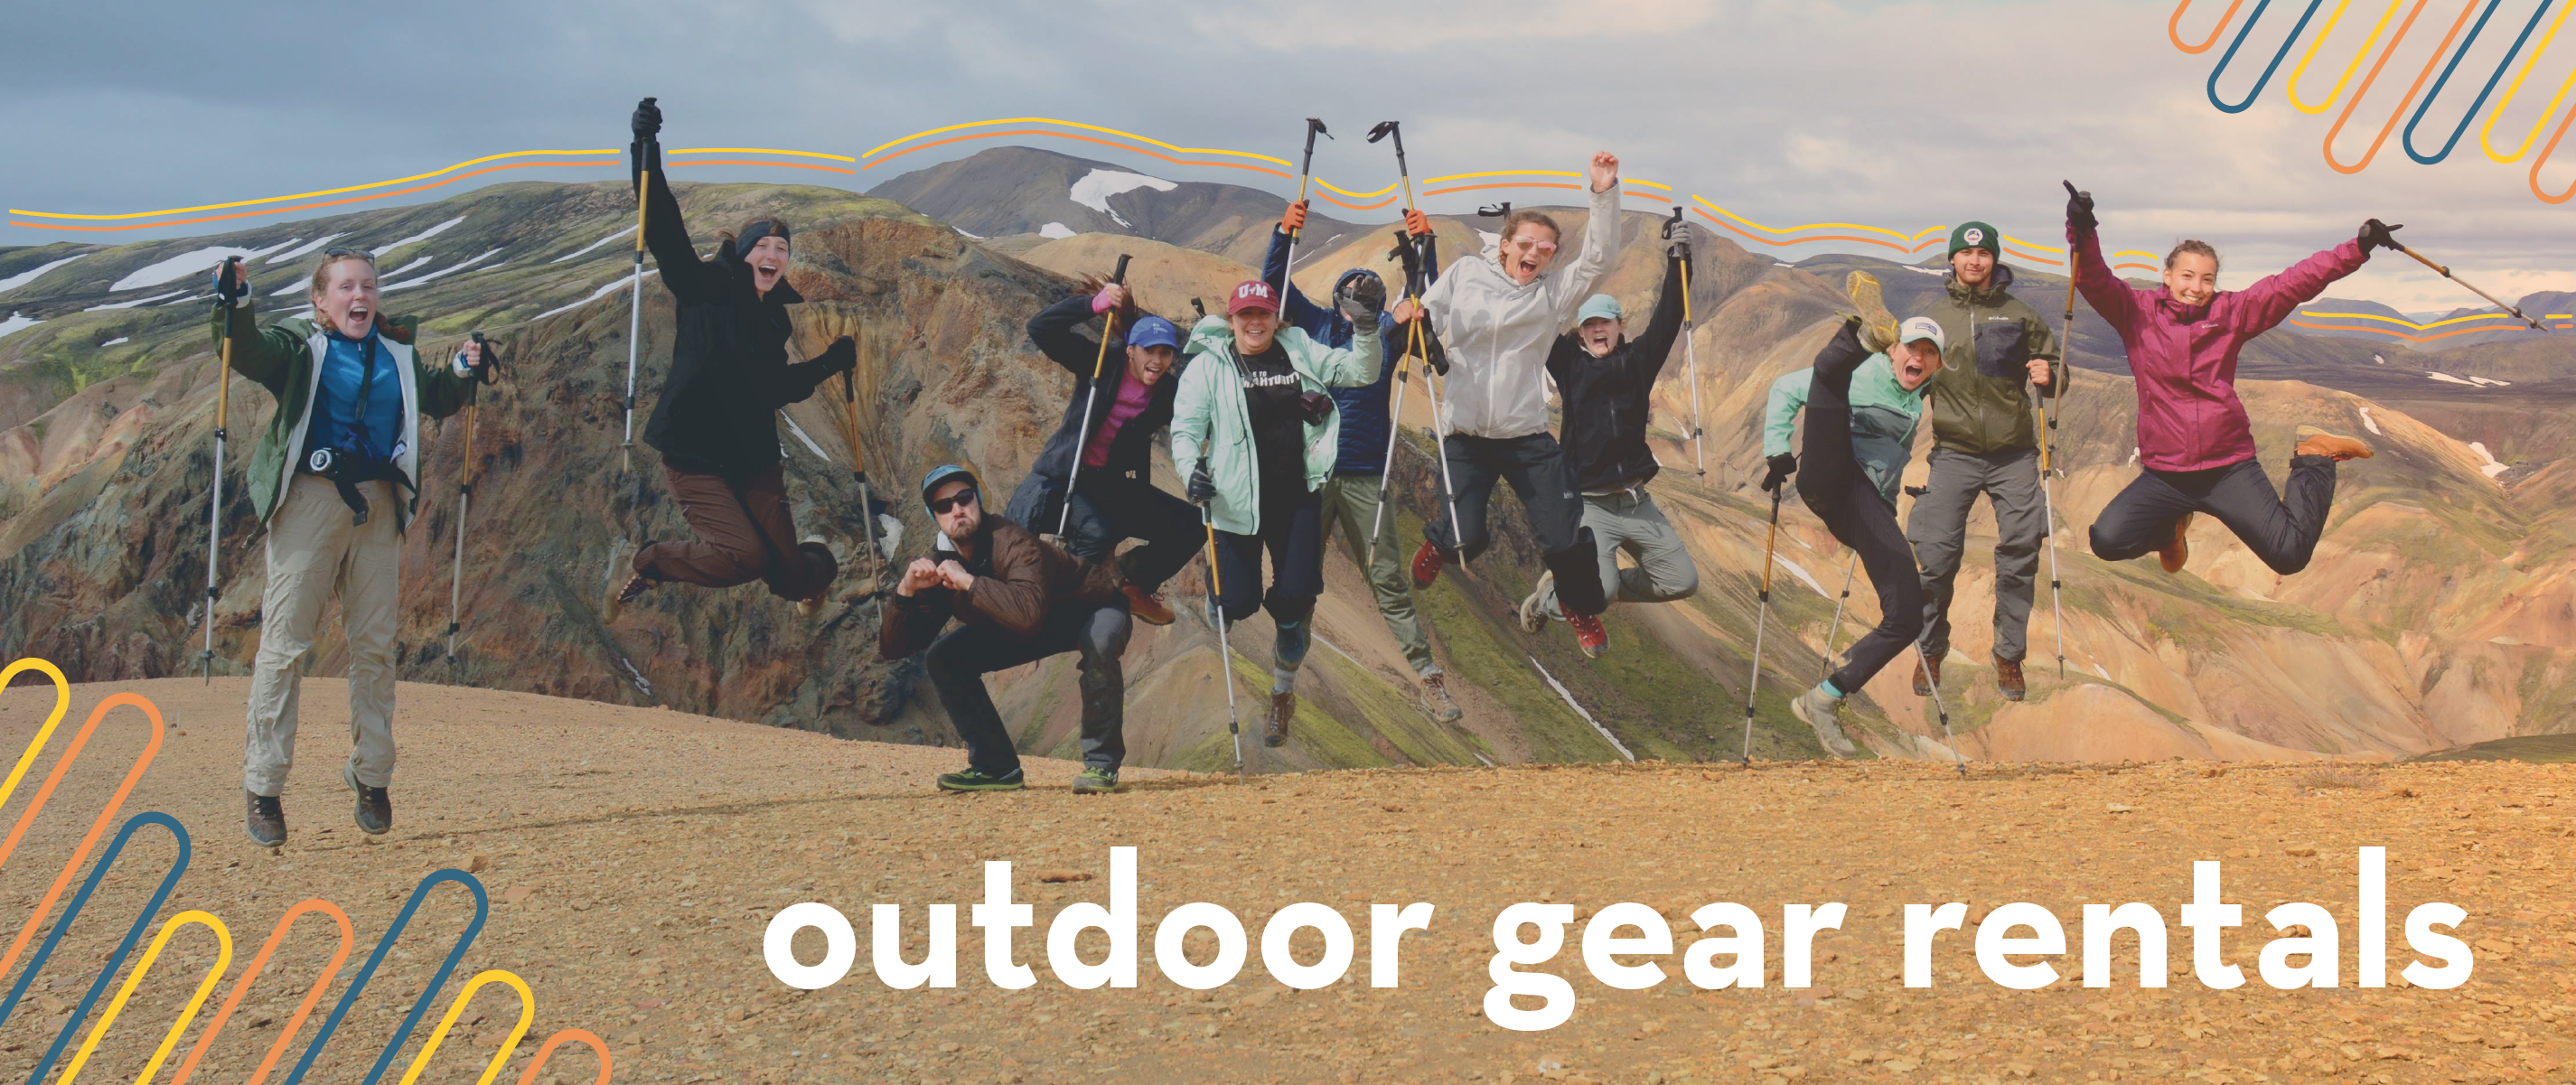 header including a Group of people jumping with backpacks on and a mountain in the background with the title "outdoor gear rentals"